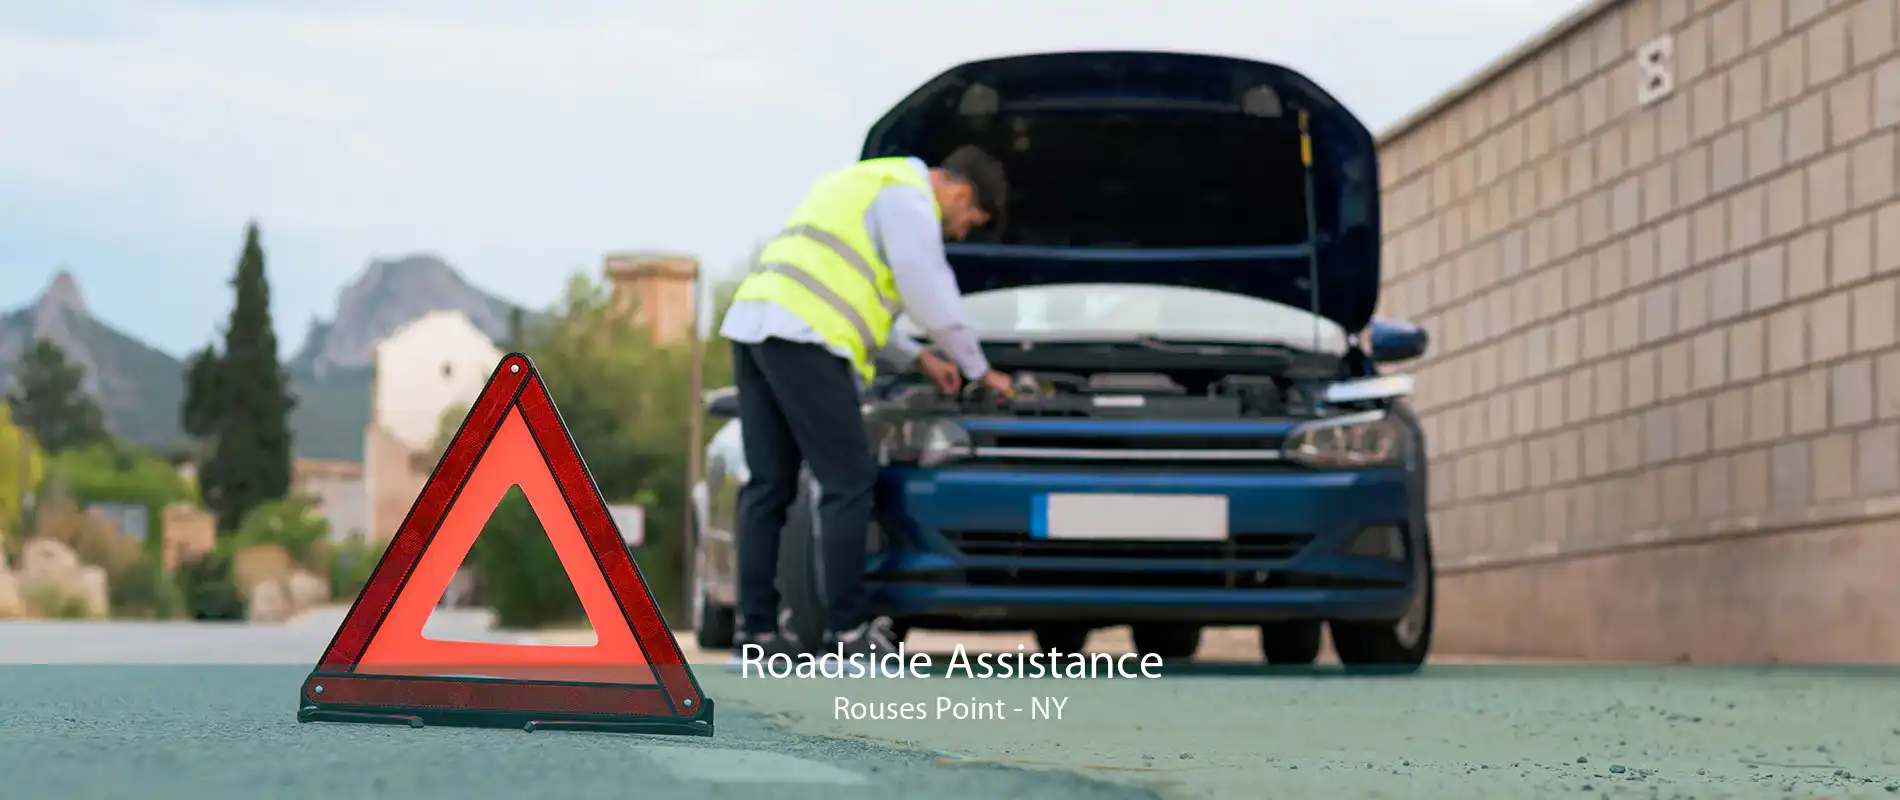 Roadside Assistance Rouses Point - NY